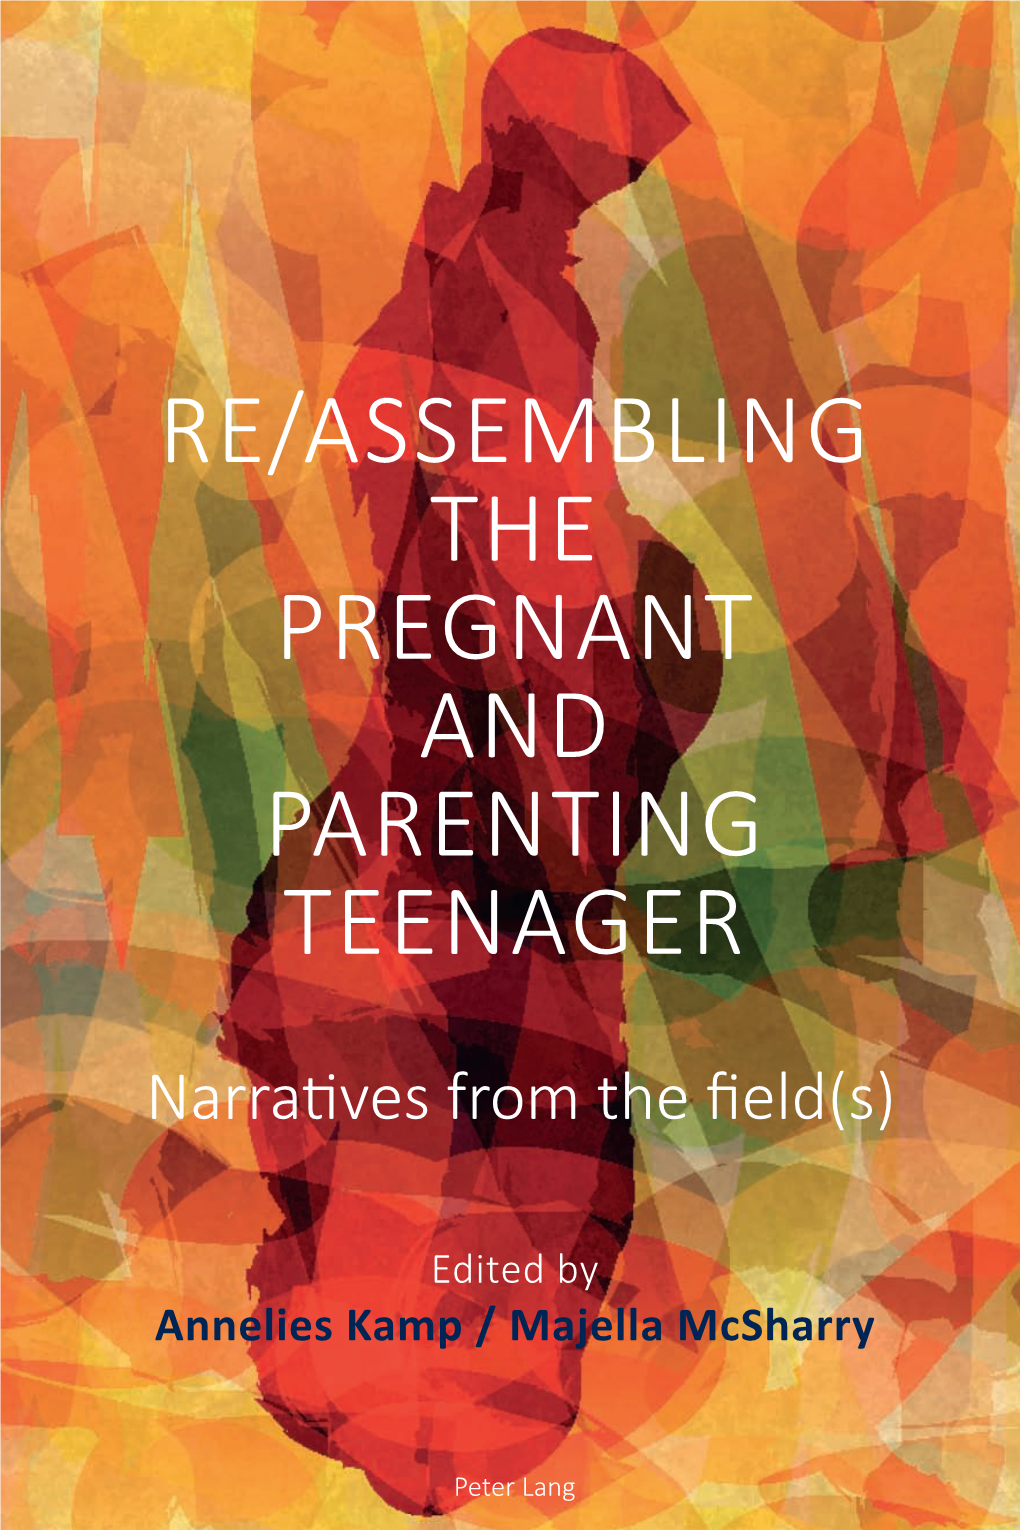 Re/Assembling the Pregnant and Parenting Teenager